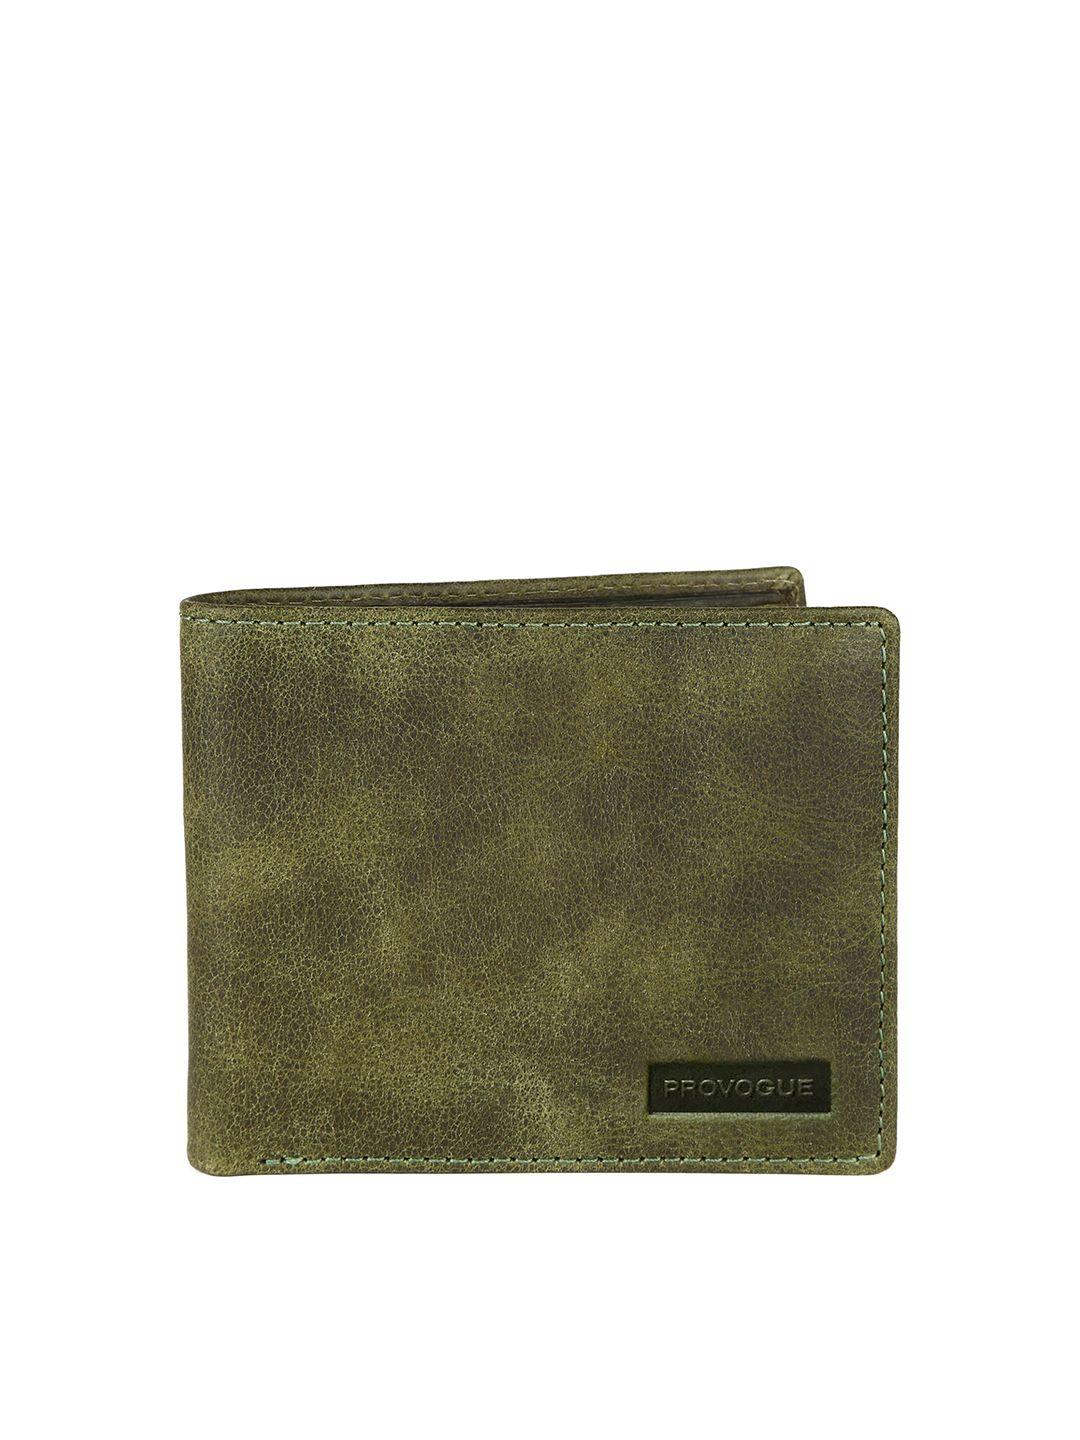 provogue men green textured leather two fold wallet